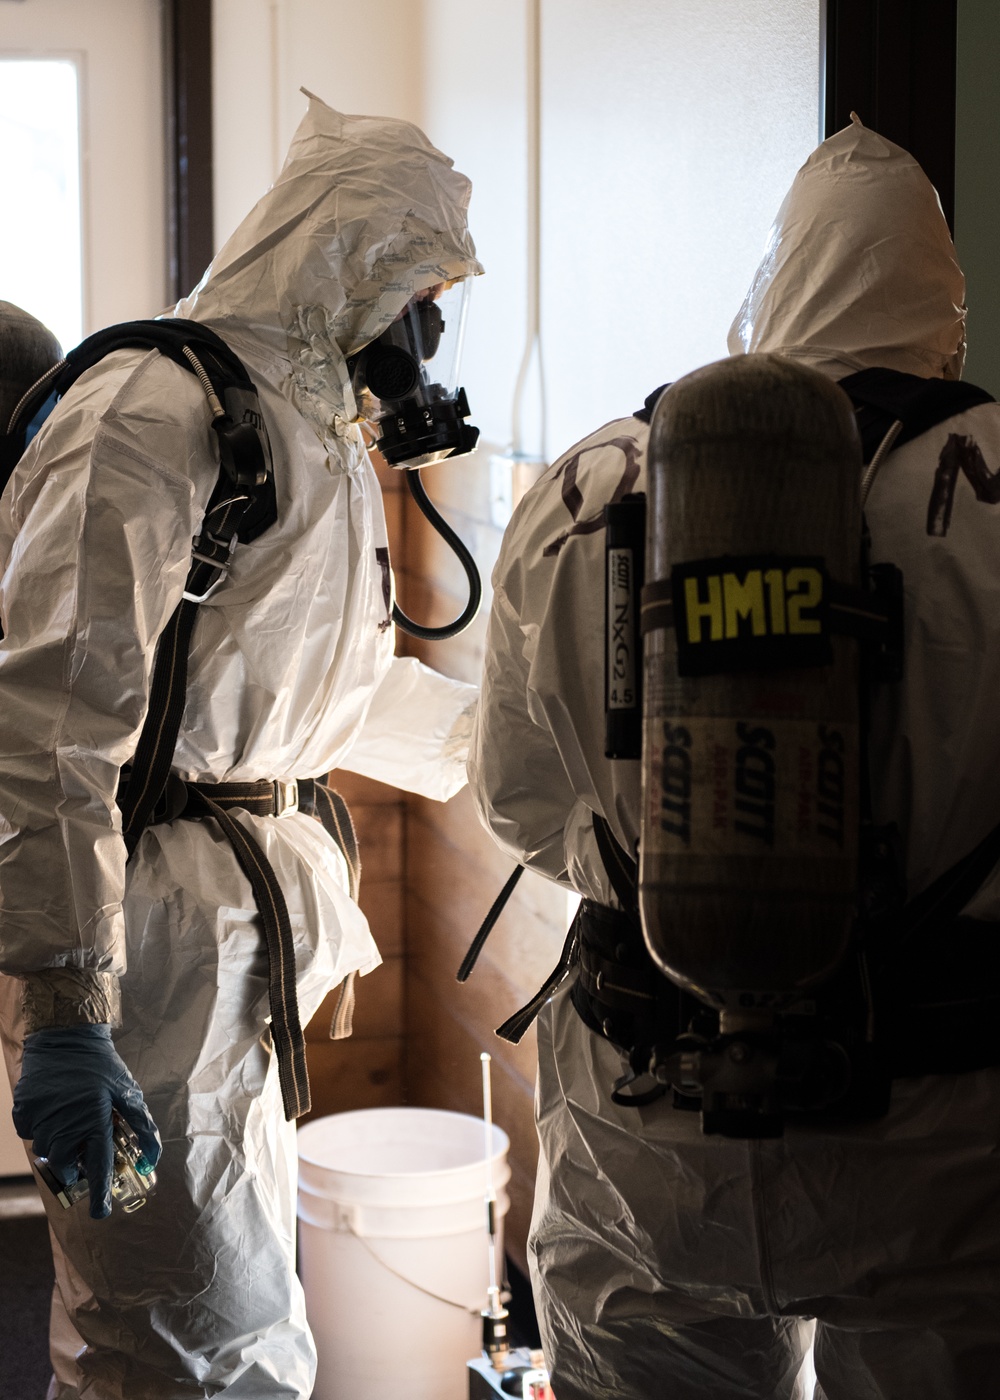 Multiple state and federal agencies respond to simulated discovery of biological contaminant